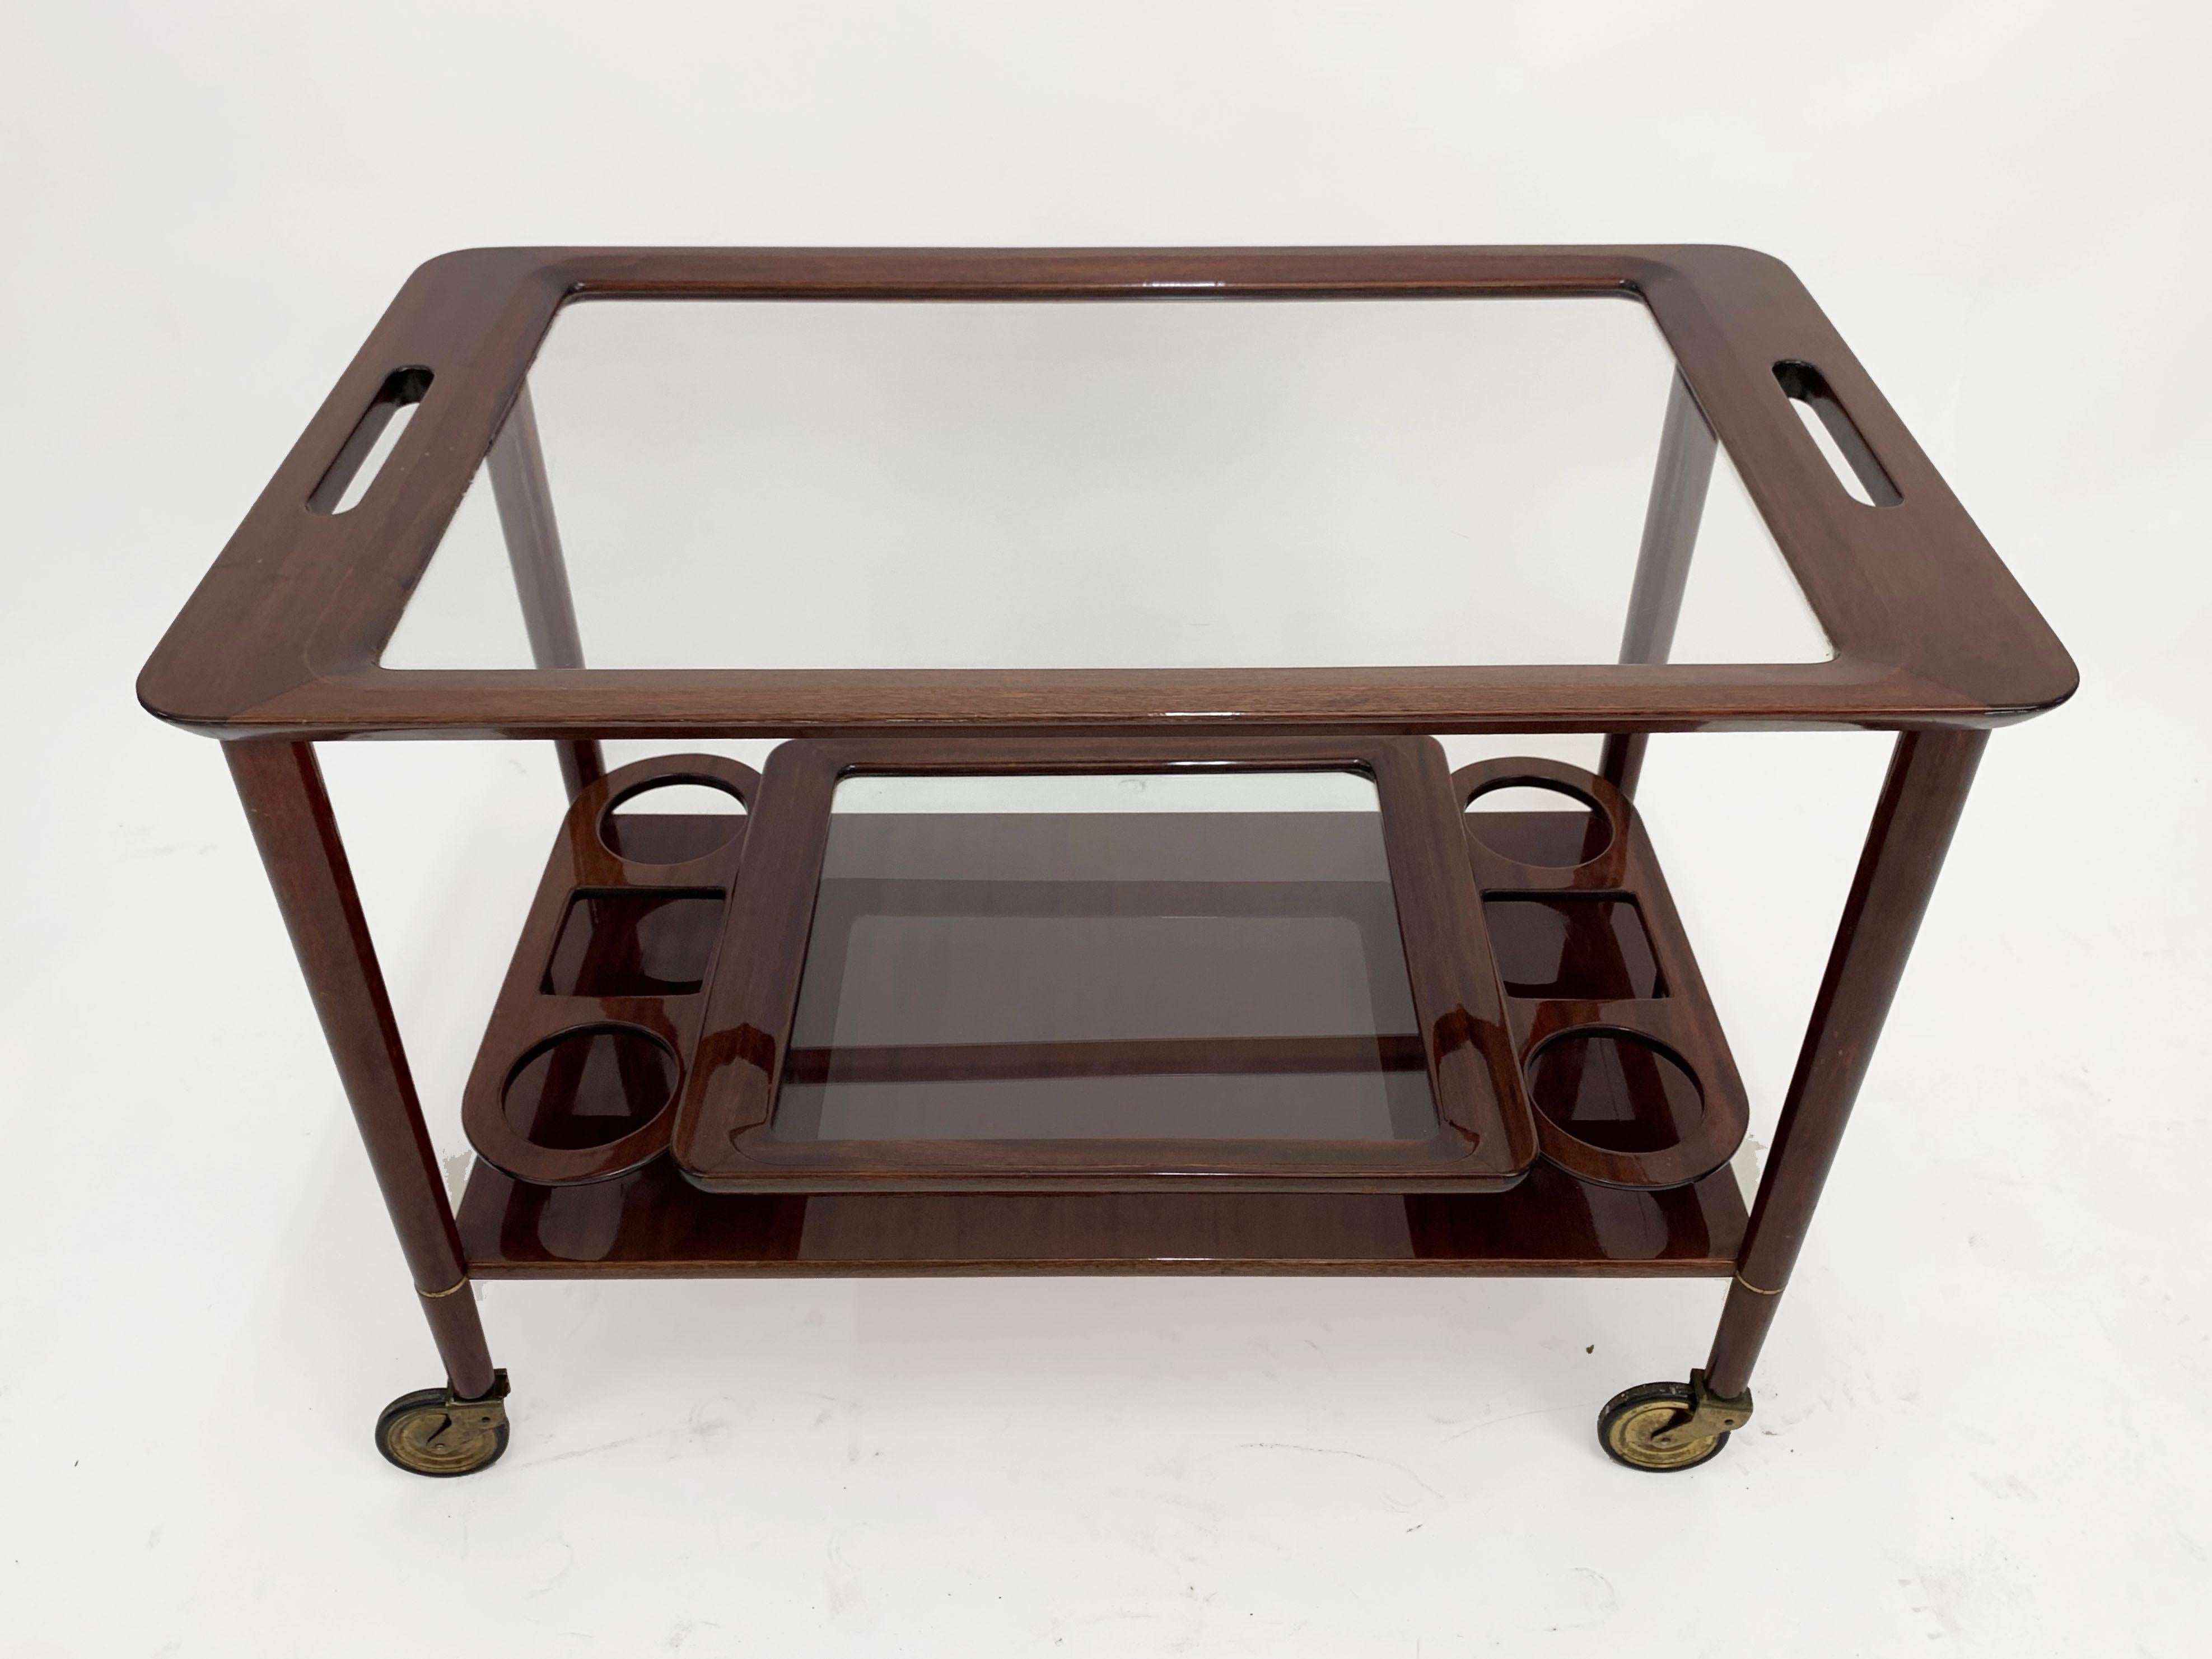 Fantastic midcentury wood bar cart with glass serving trays. This piece is attributed to Cesare Lacca and it was designed in Italy during 1950s.

This wonderful piece comes with a removable glass tray and has an ergonomic bottle holder, while the